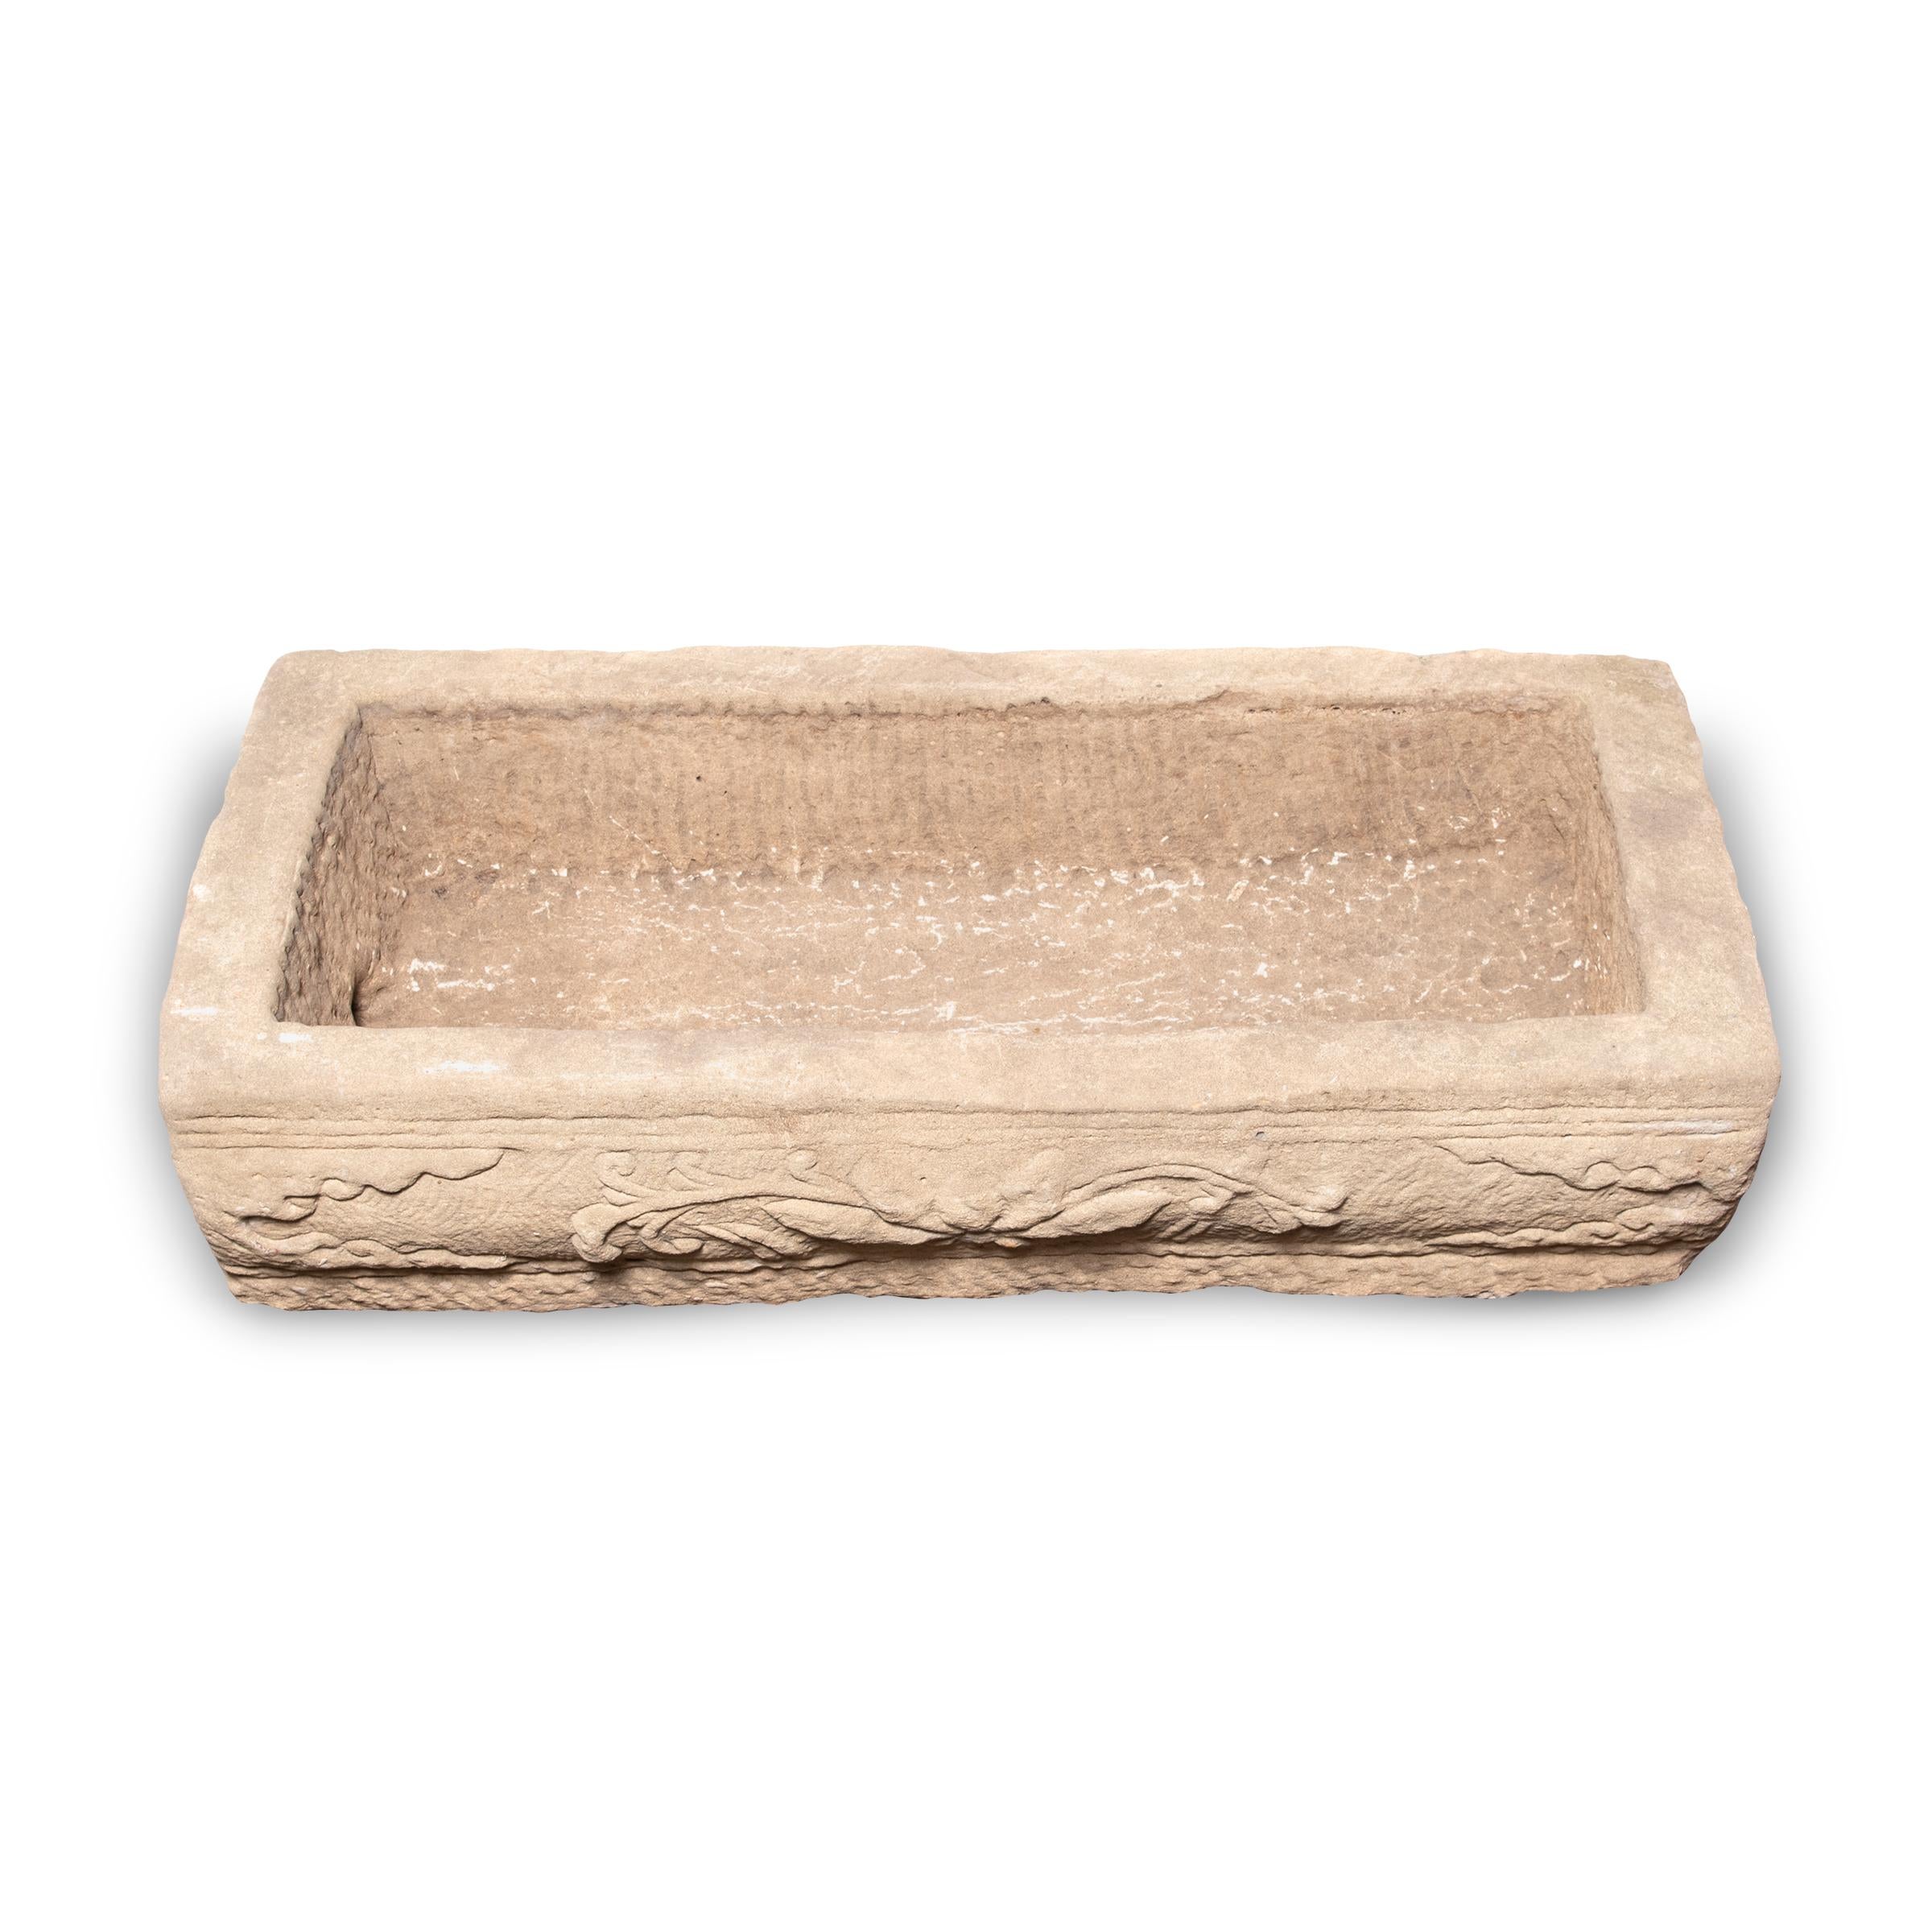 Prized mounts once took refreshment from this stone trough, carved from a solid block of limestone more than one hundred years ago. Once purely functional, the trough is celebrated today for its elegant form, rustic authenticity, and beautifully